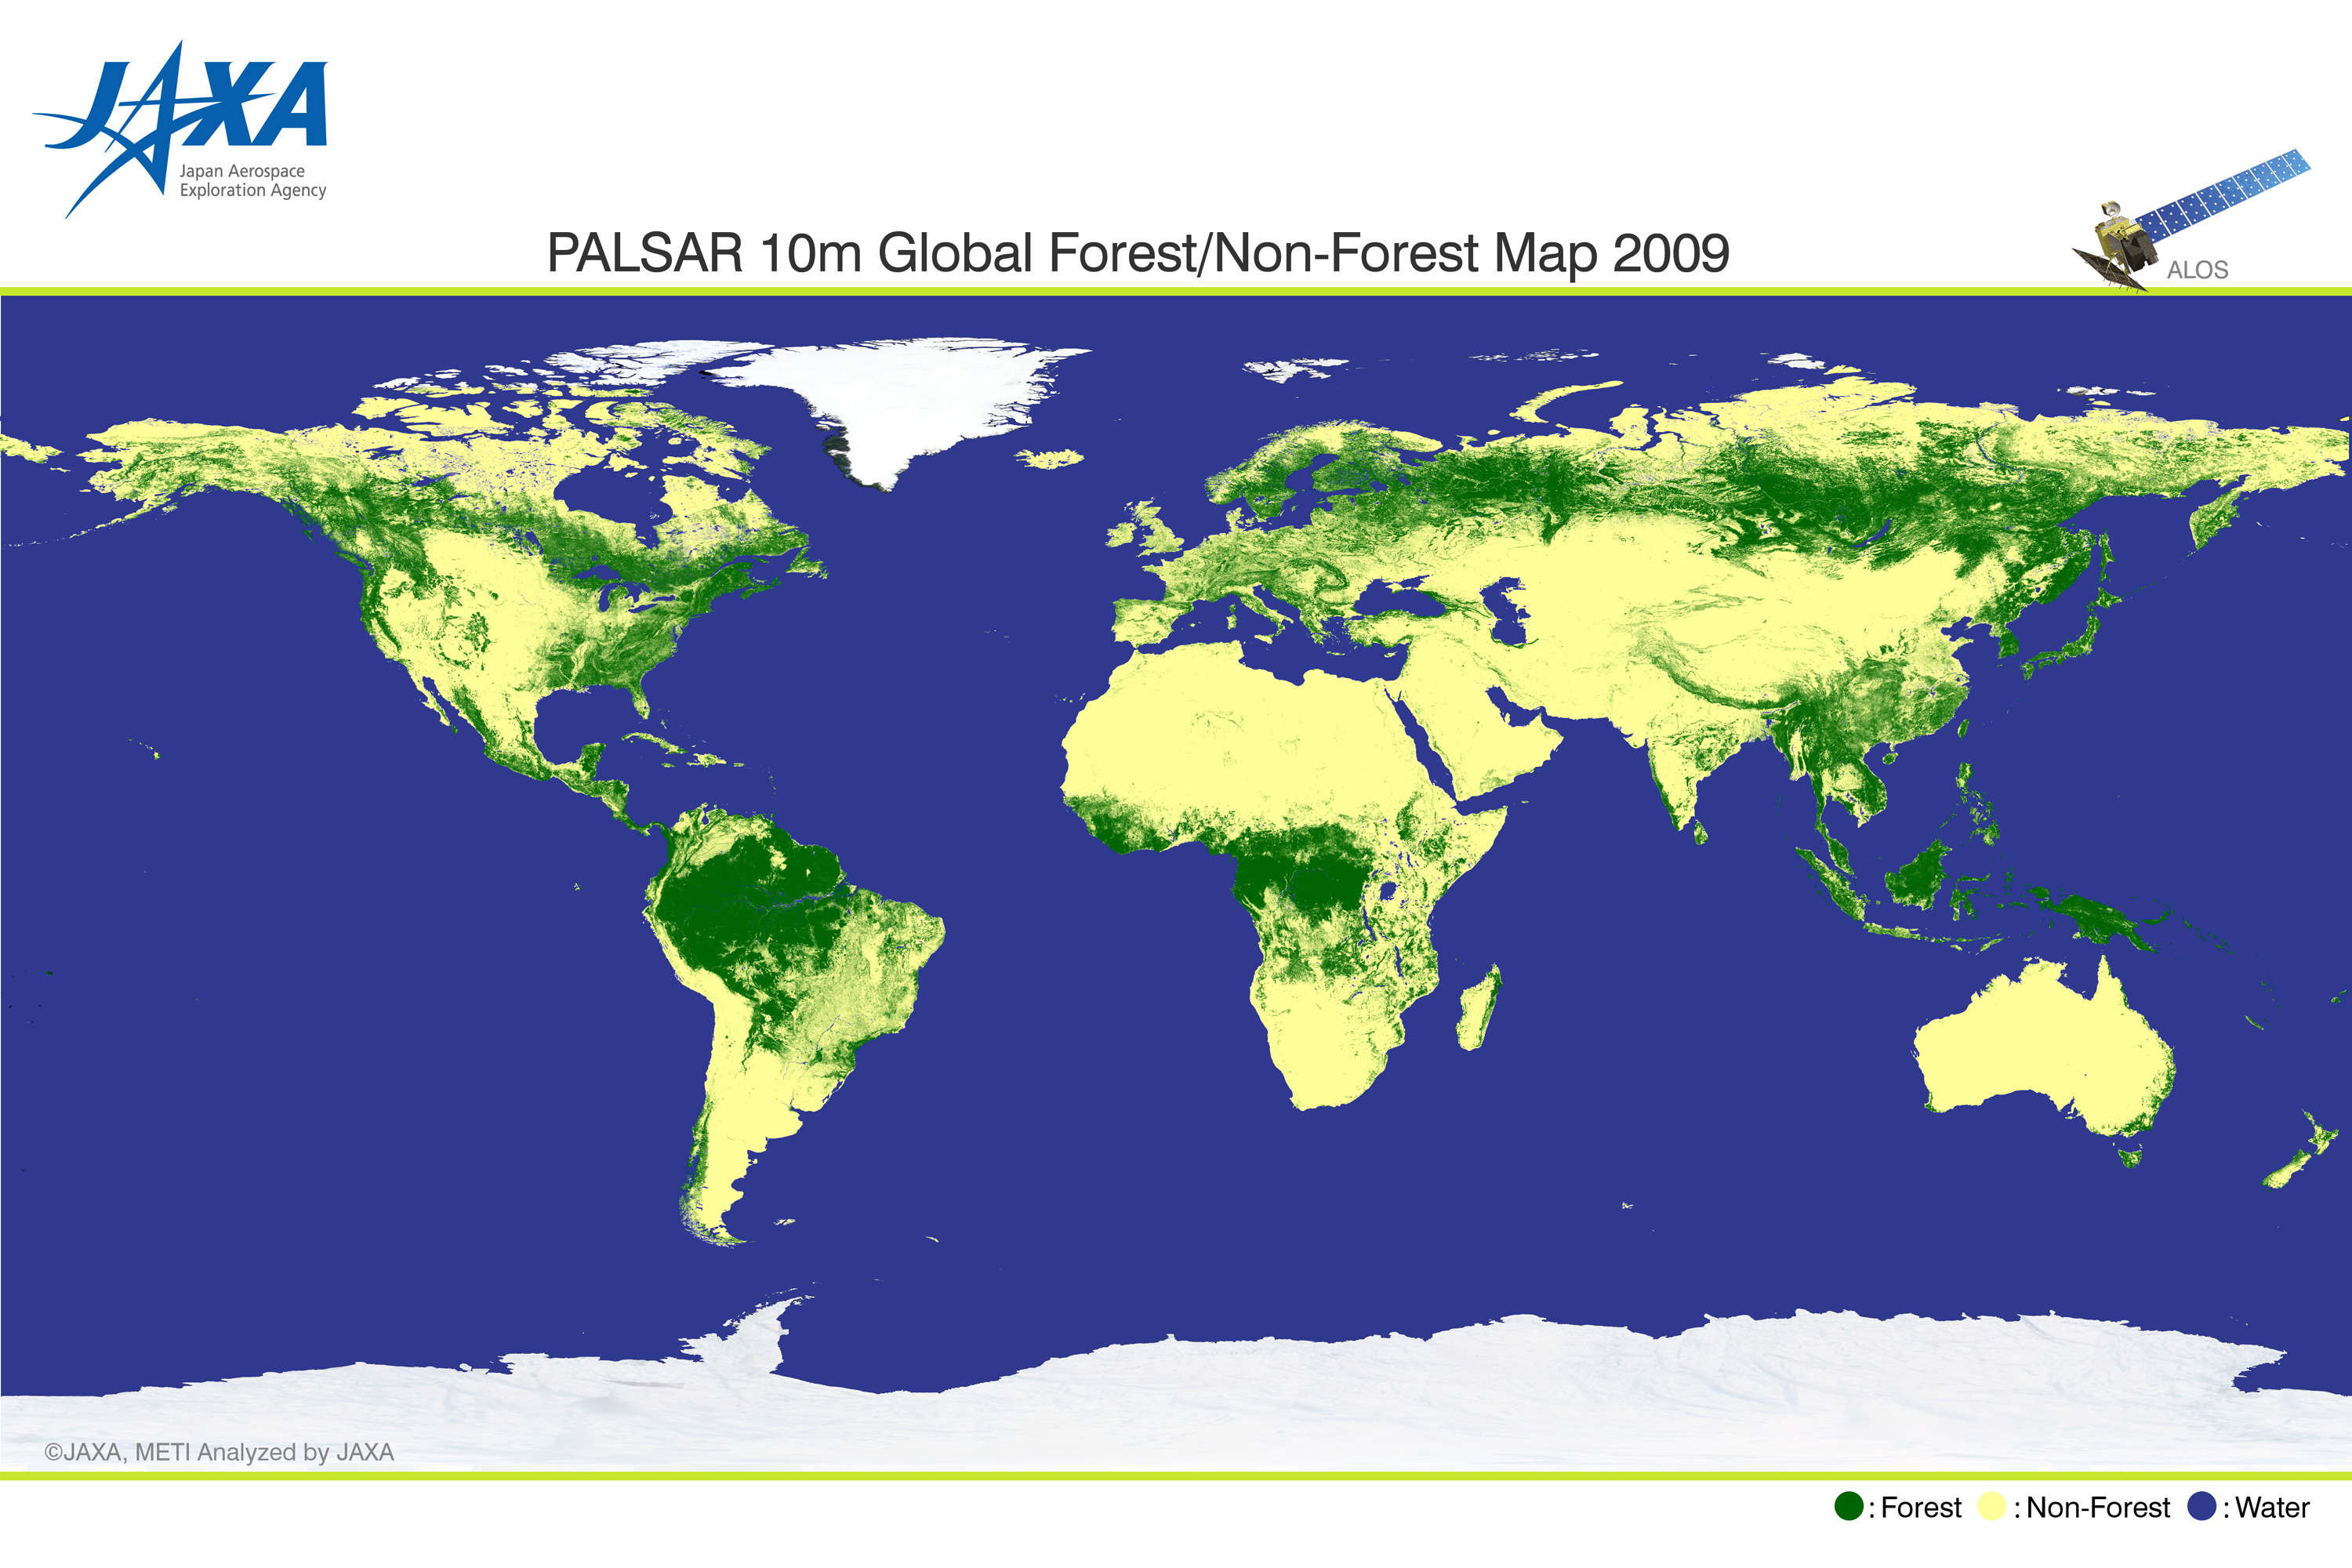 Figure 2: Global Forest/Non-forest Map 2009